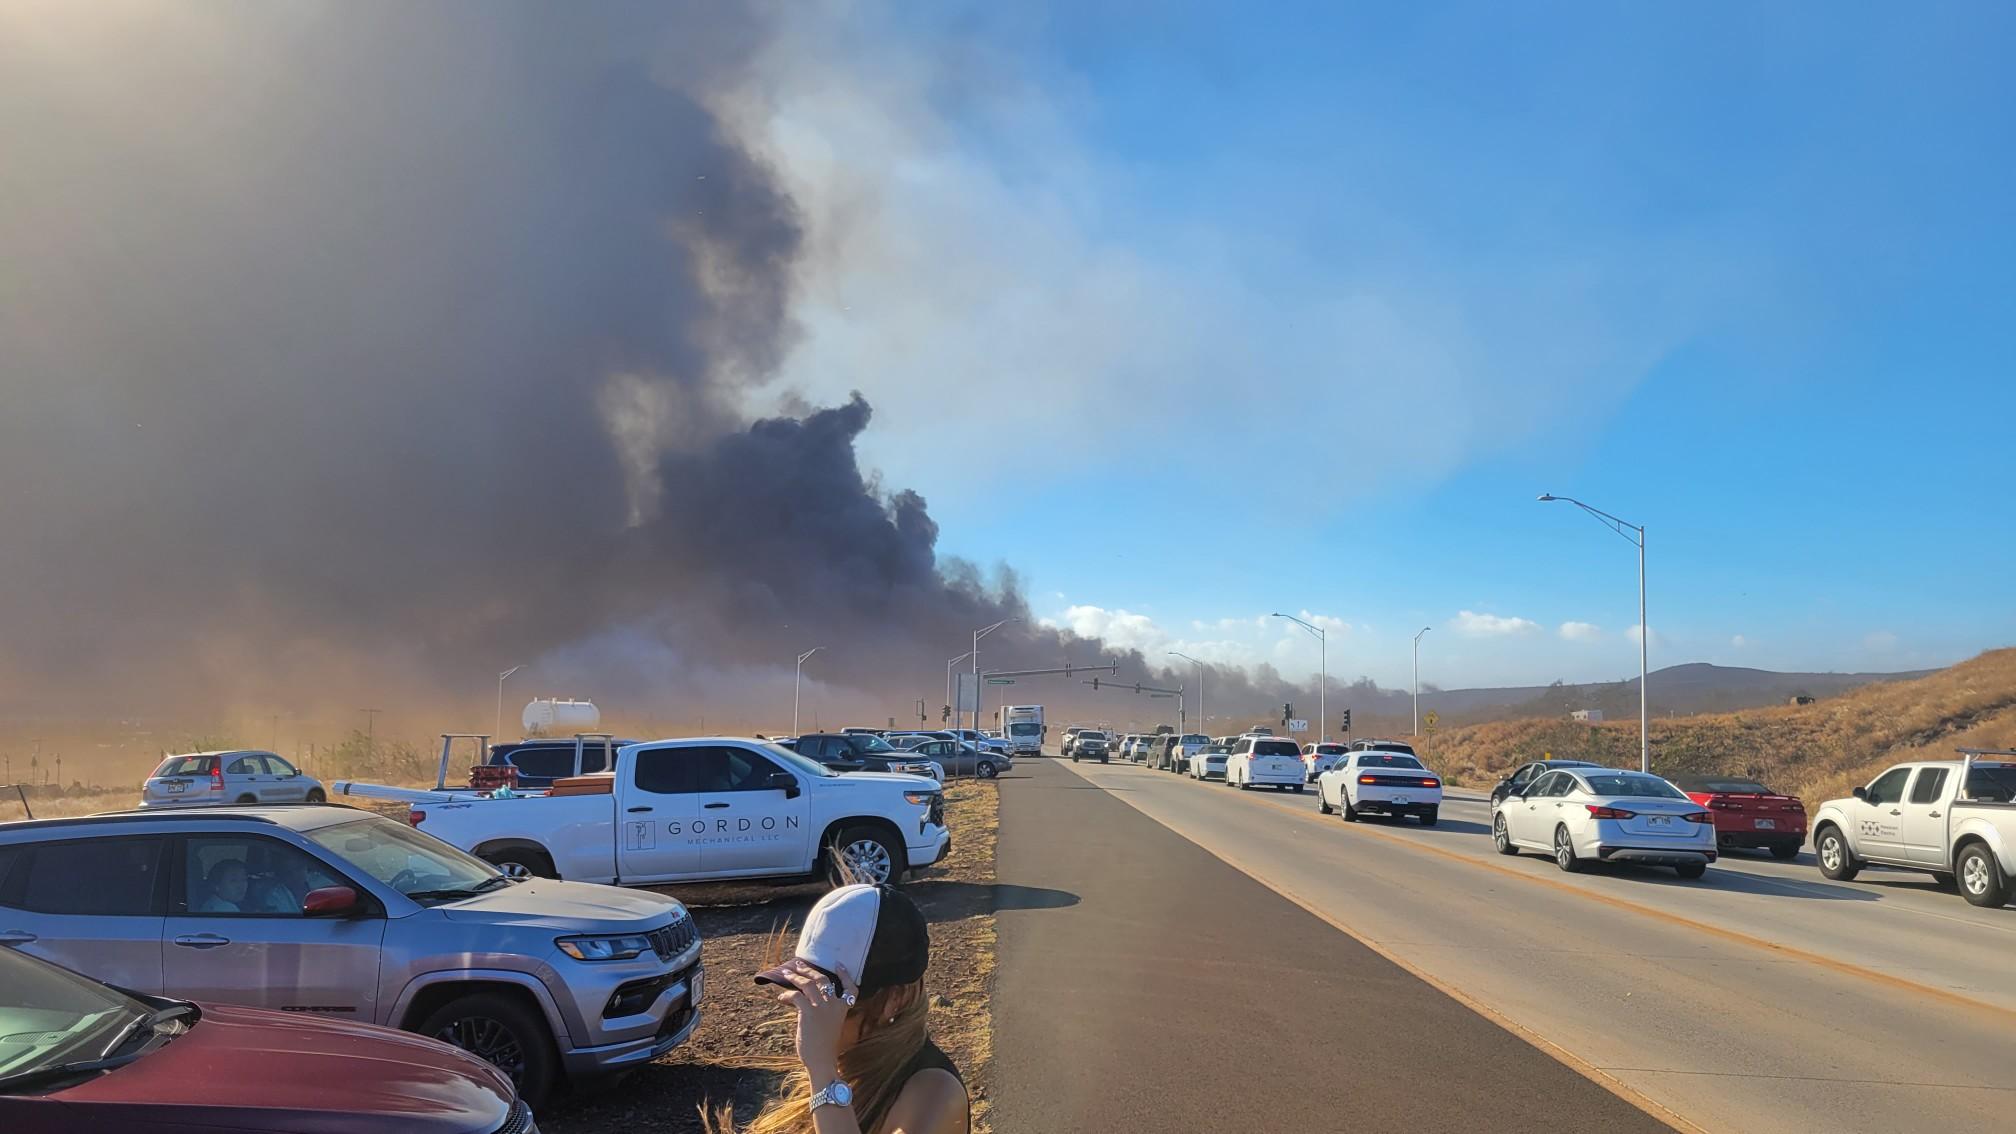 They dont know how many people truly died” Colorado man shares horrifying encounter of Maui wildfires picture